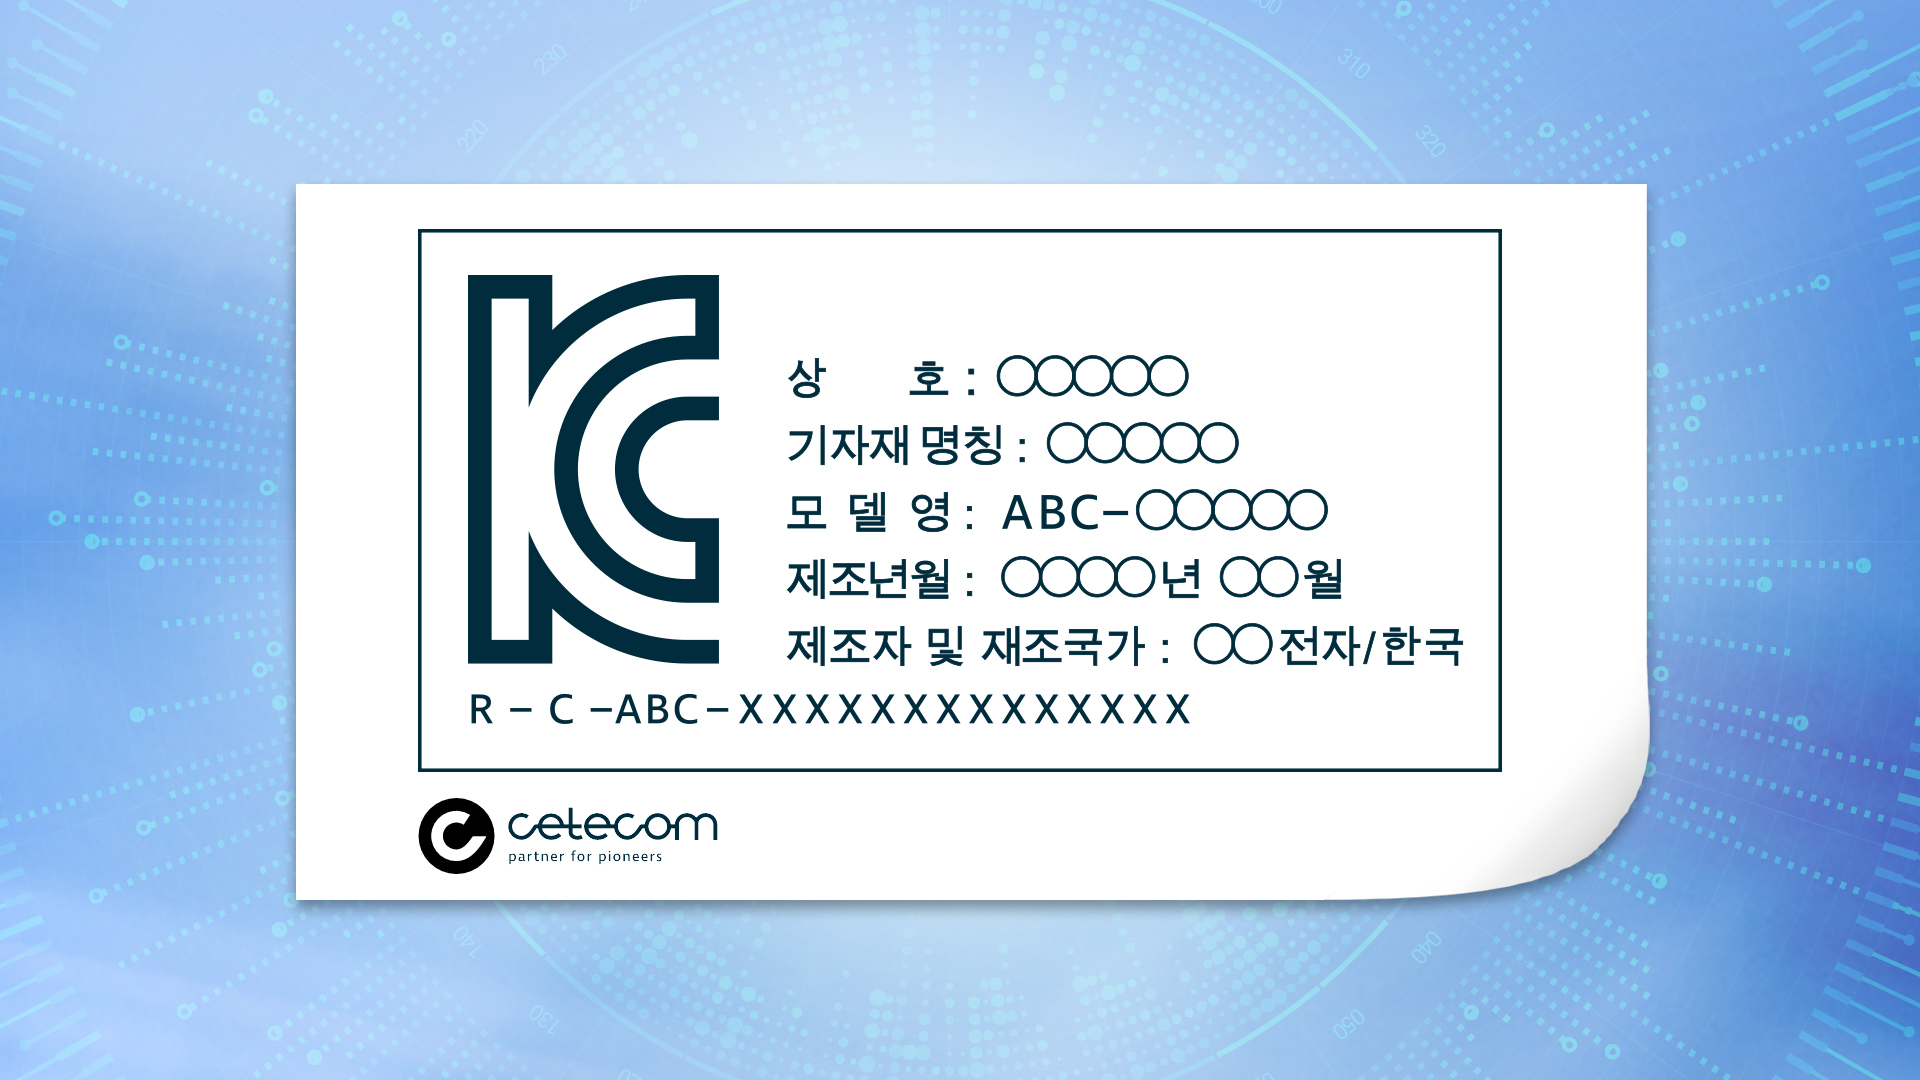 A KC certification label on which both the KC logo and the Cetecom logo can be seen